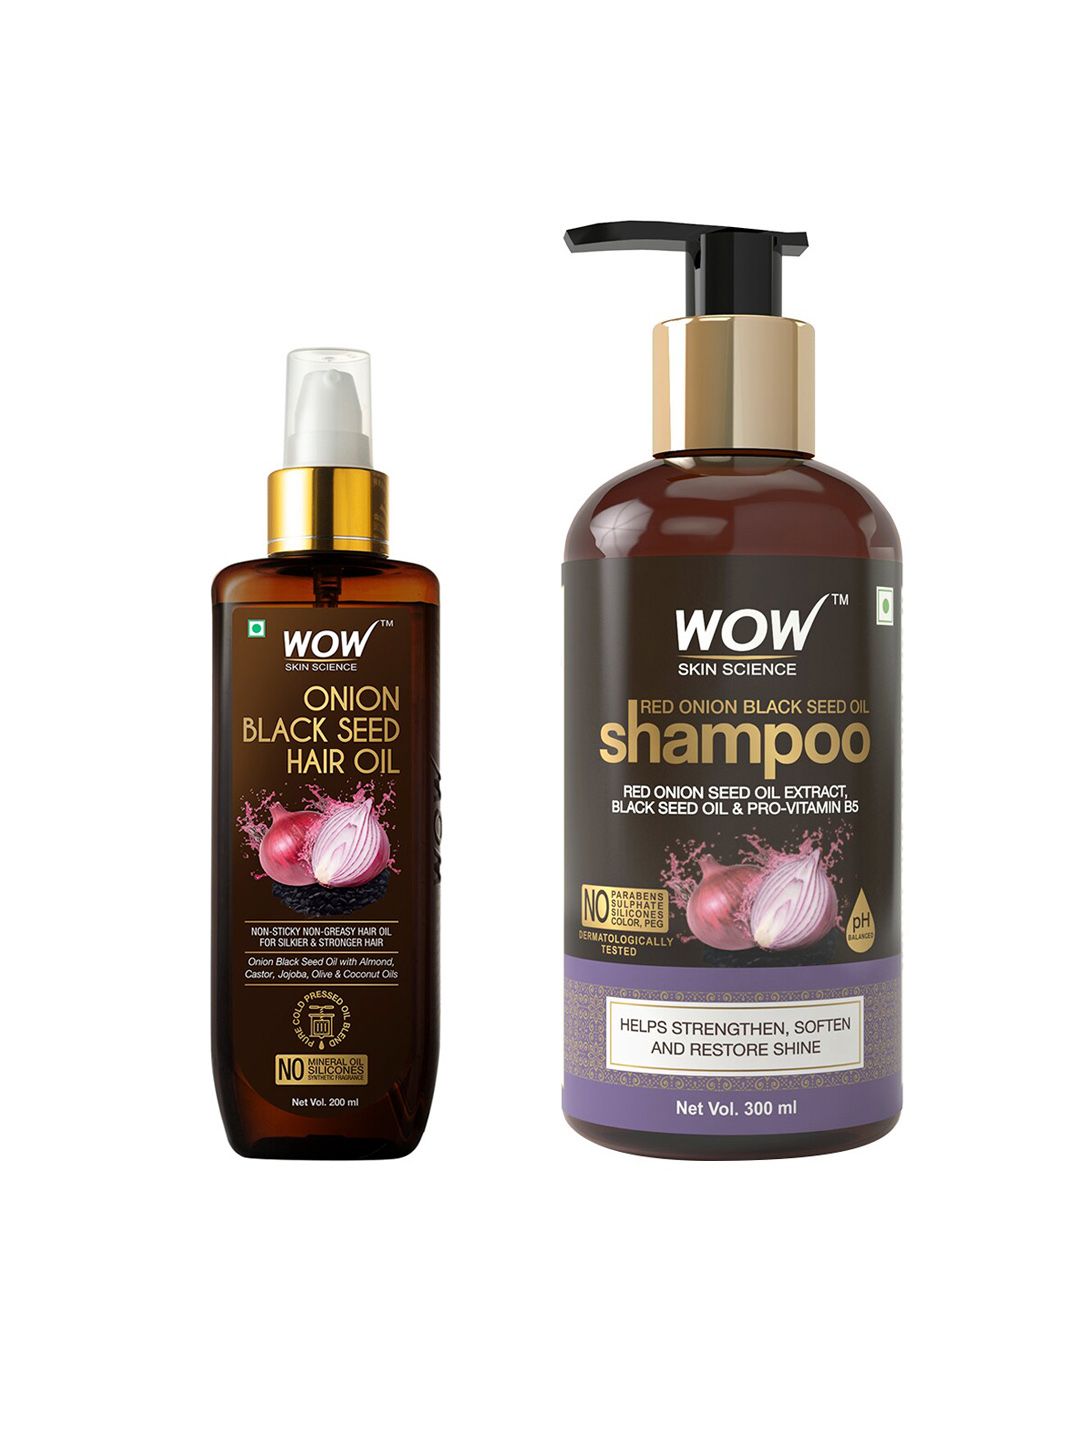 WOW SKIN SCIENCE Set of Onion Black Seed Oil Shampoo & Hair Oil Price in India